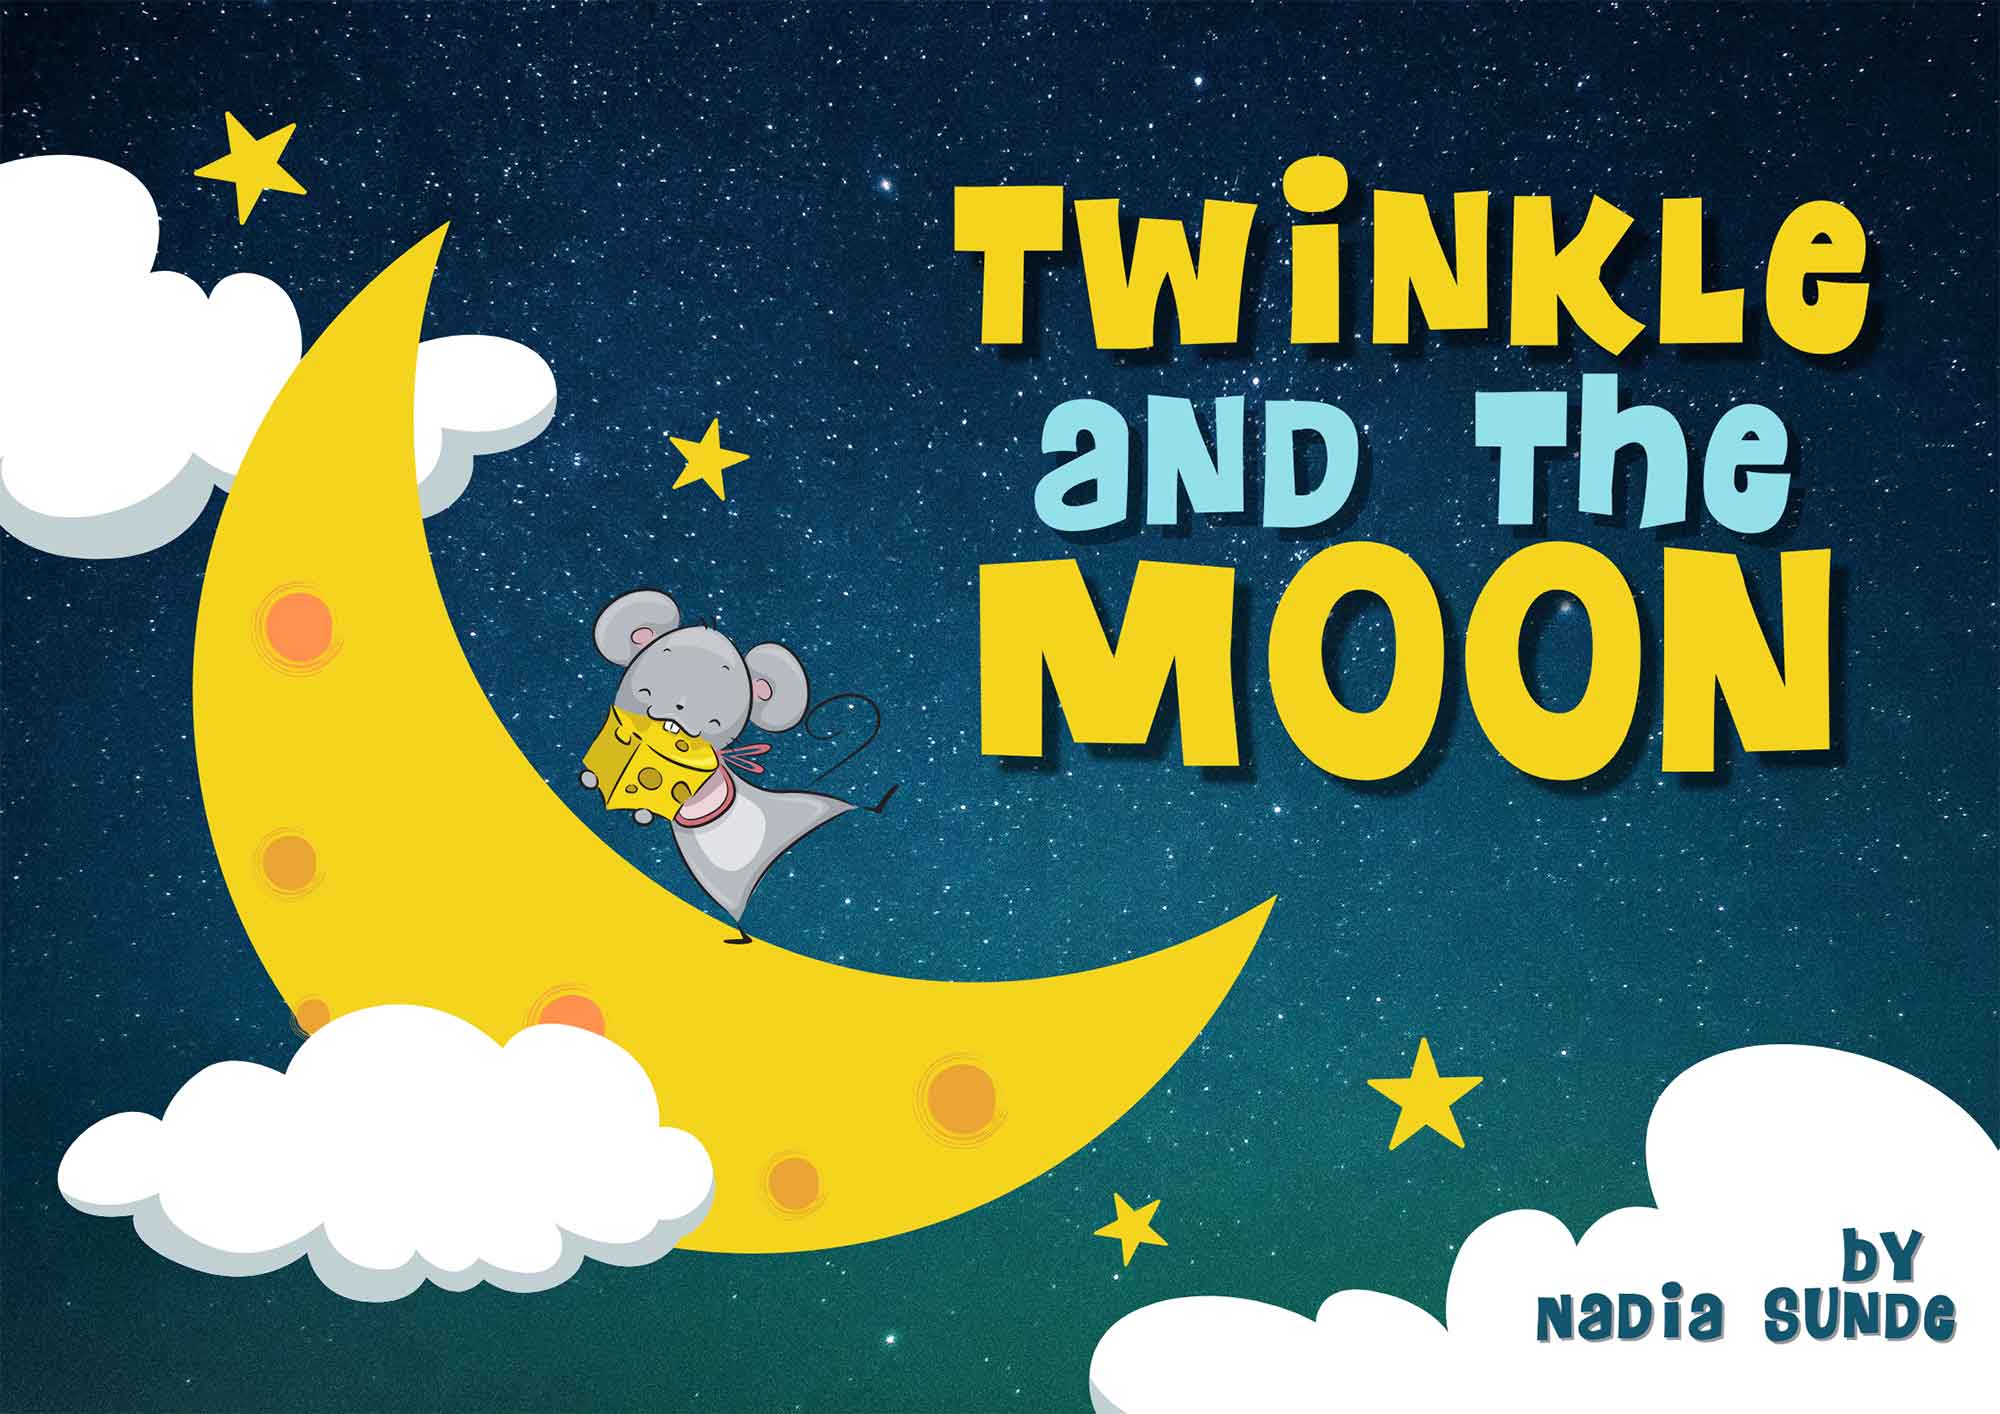 Twinkle and the Moon. A cartoon image of a mouse standing on a crescent moon eating cheese. Both the cheese and moon have holes in them.